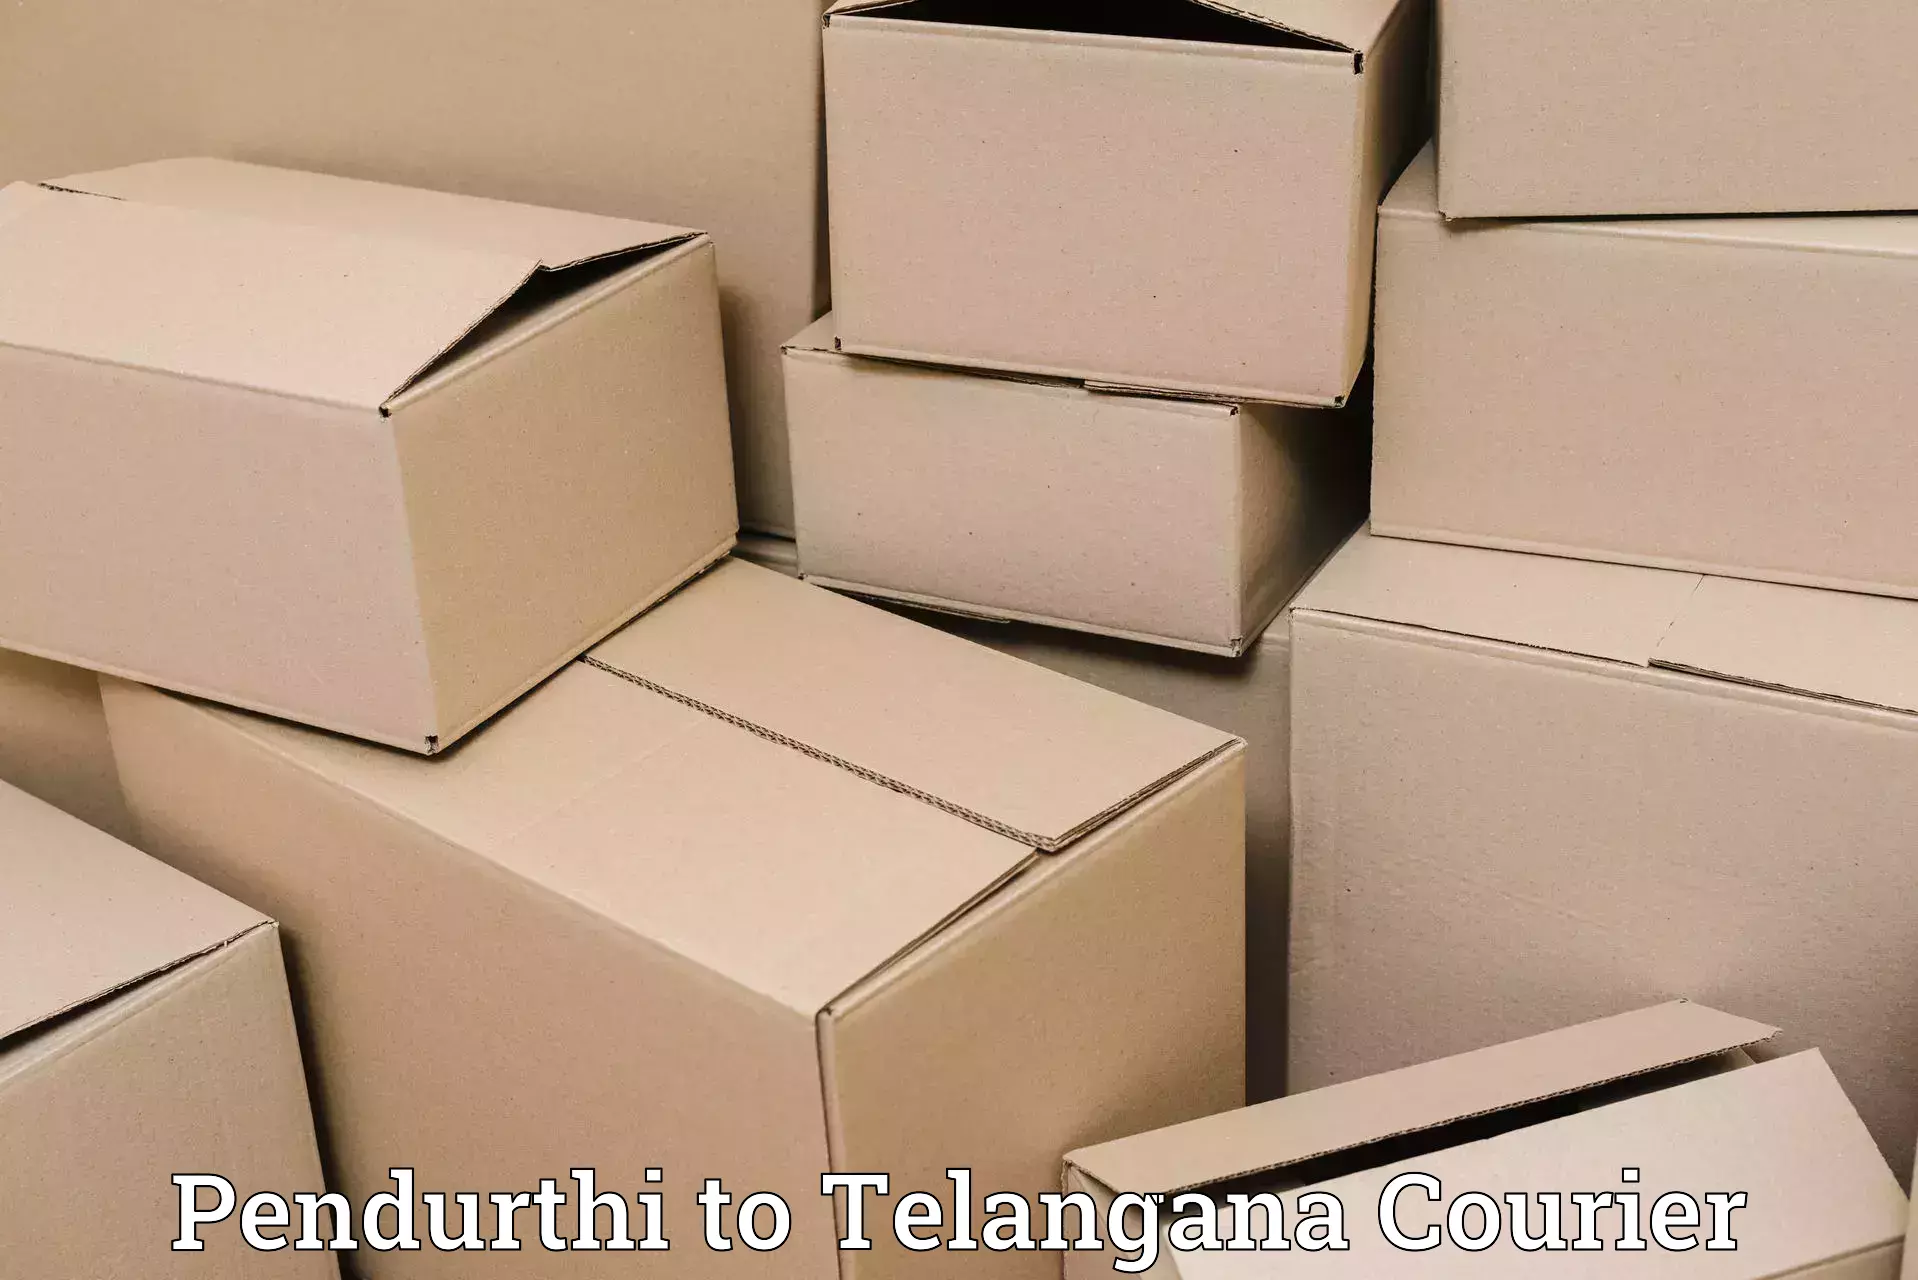 Cargo delivery service in Pendurthi to Cheyyur